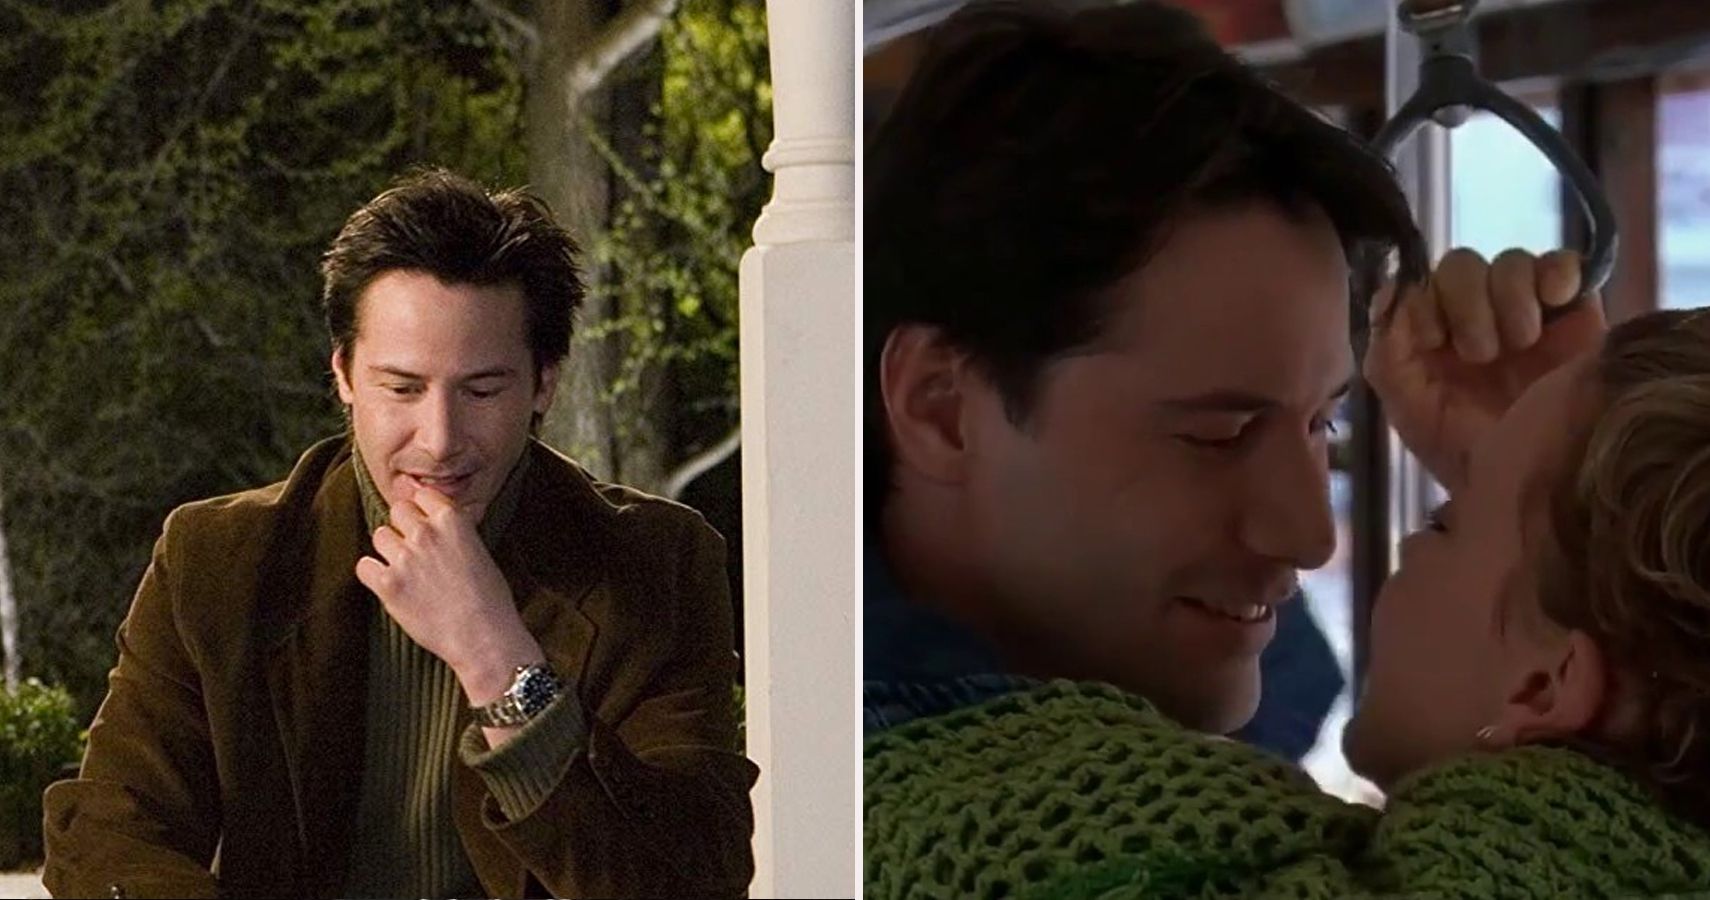 10 Underrated Keanu Reeves Movies Fans Probably Haven't Seen. 